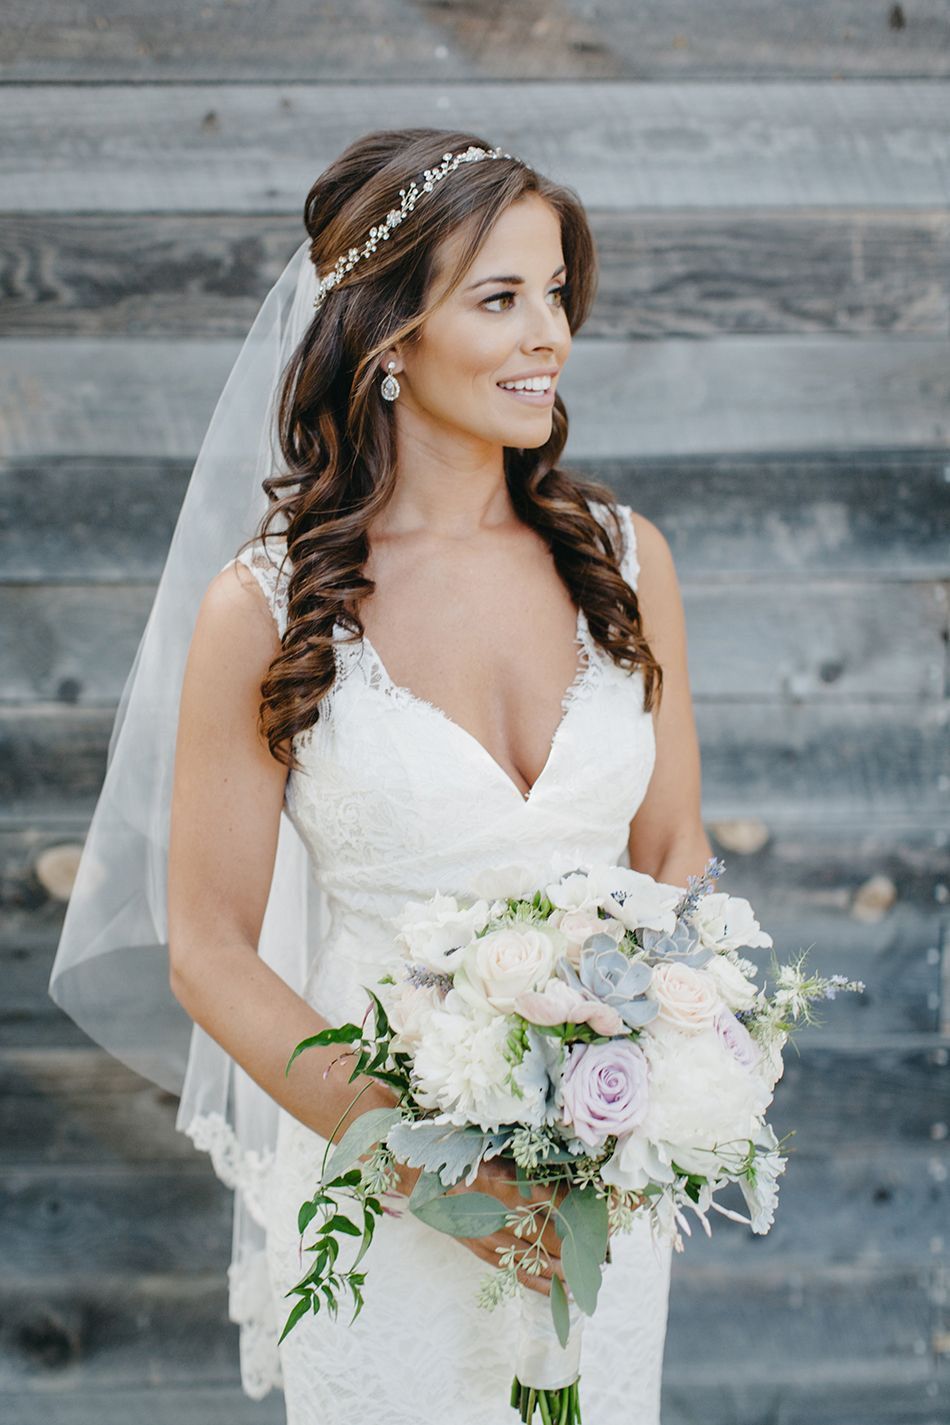 27 Wedding Hairstyles With Veil For Your Big Day -   11 hairstyles Wedding with veil ideas